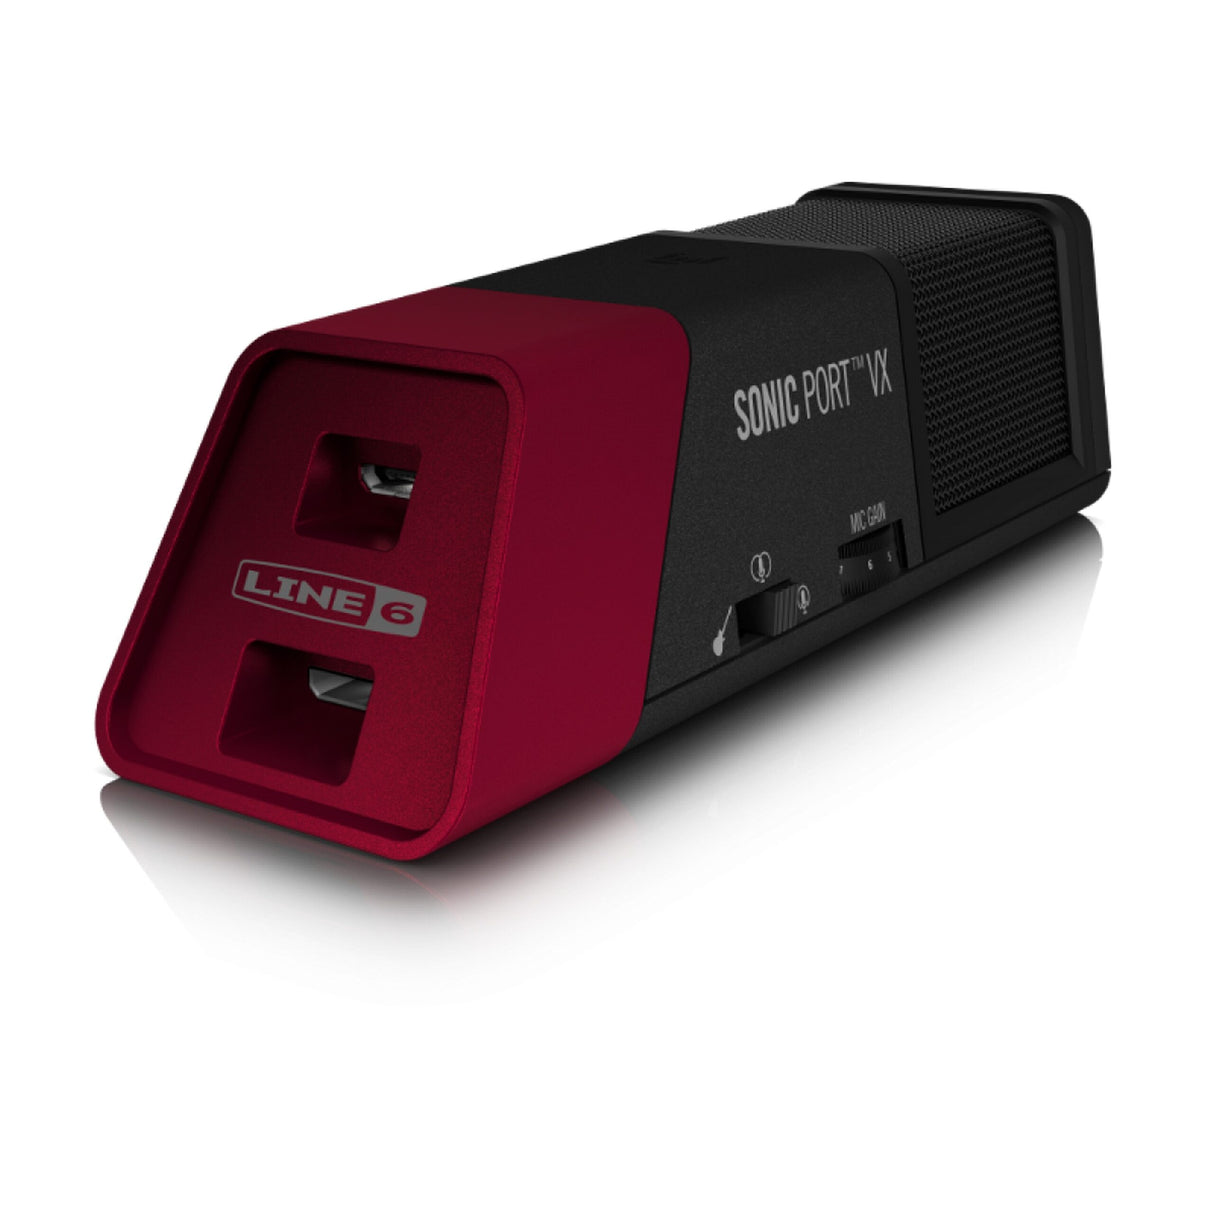 Line 6 Sonic Port VX Guitar System for iOS Devices